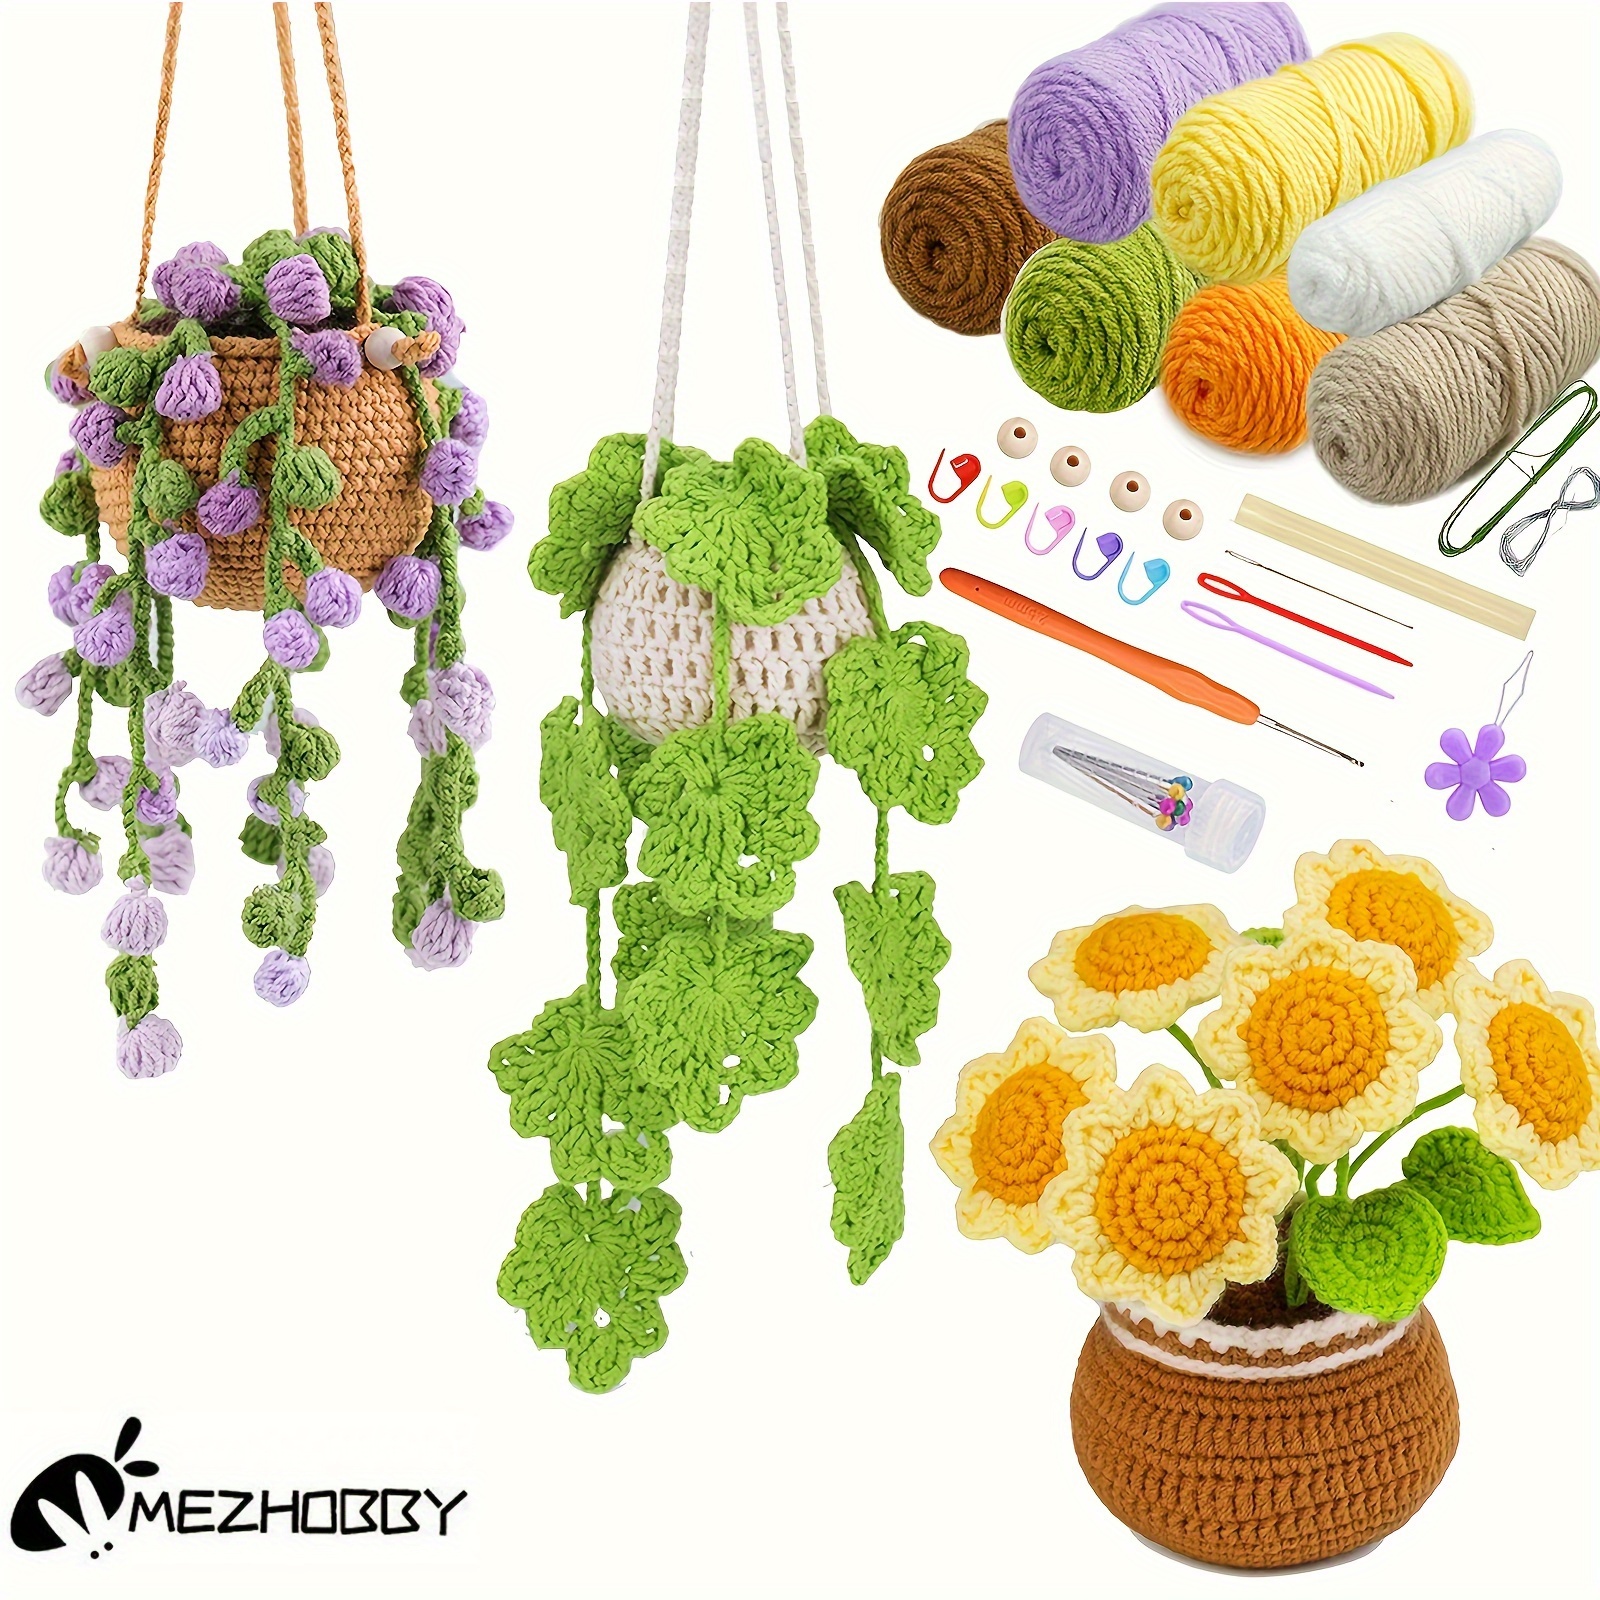 

Crochet Kit For Beginners, 3pack Hanging Potted Plants, Sunflower Crochet Starter Kit With Easy To Follow Tutorials For Adults Birthday Gift, Home Decor